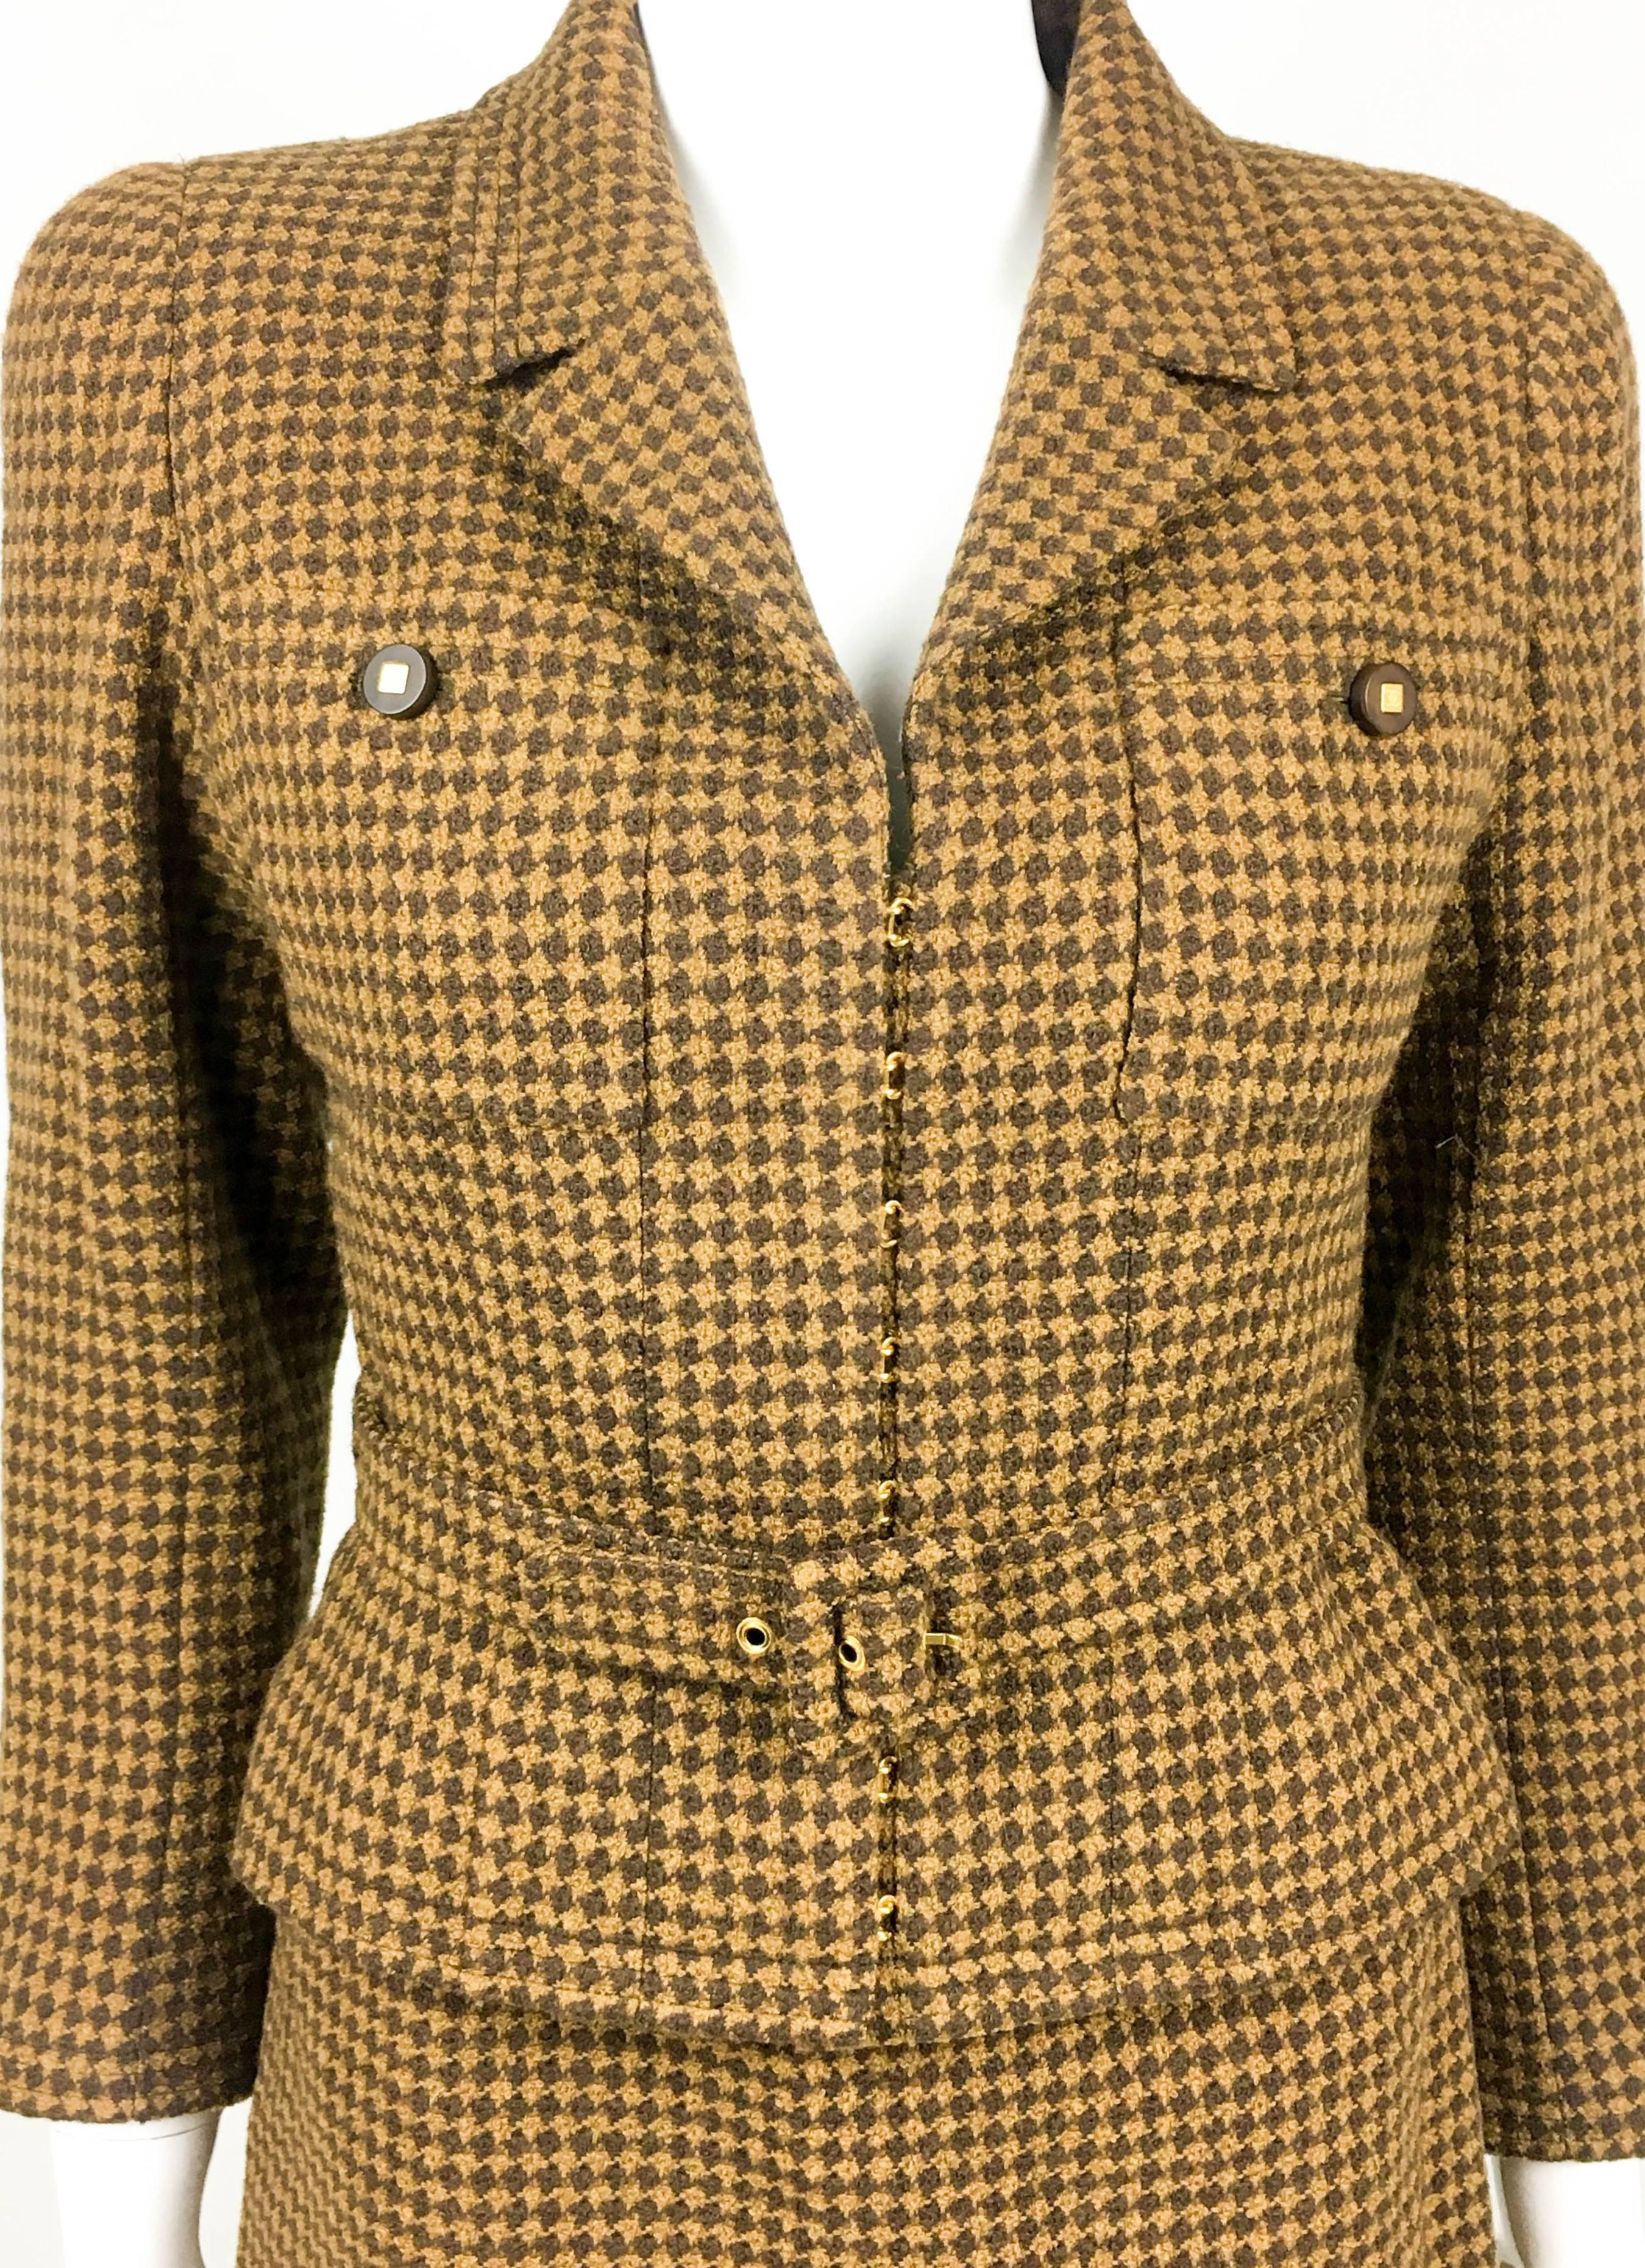 1996 Chanel Brown Houndstooth Skirt Suit 4